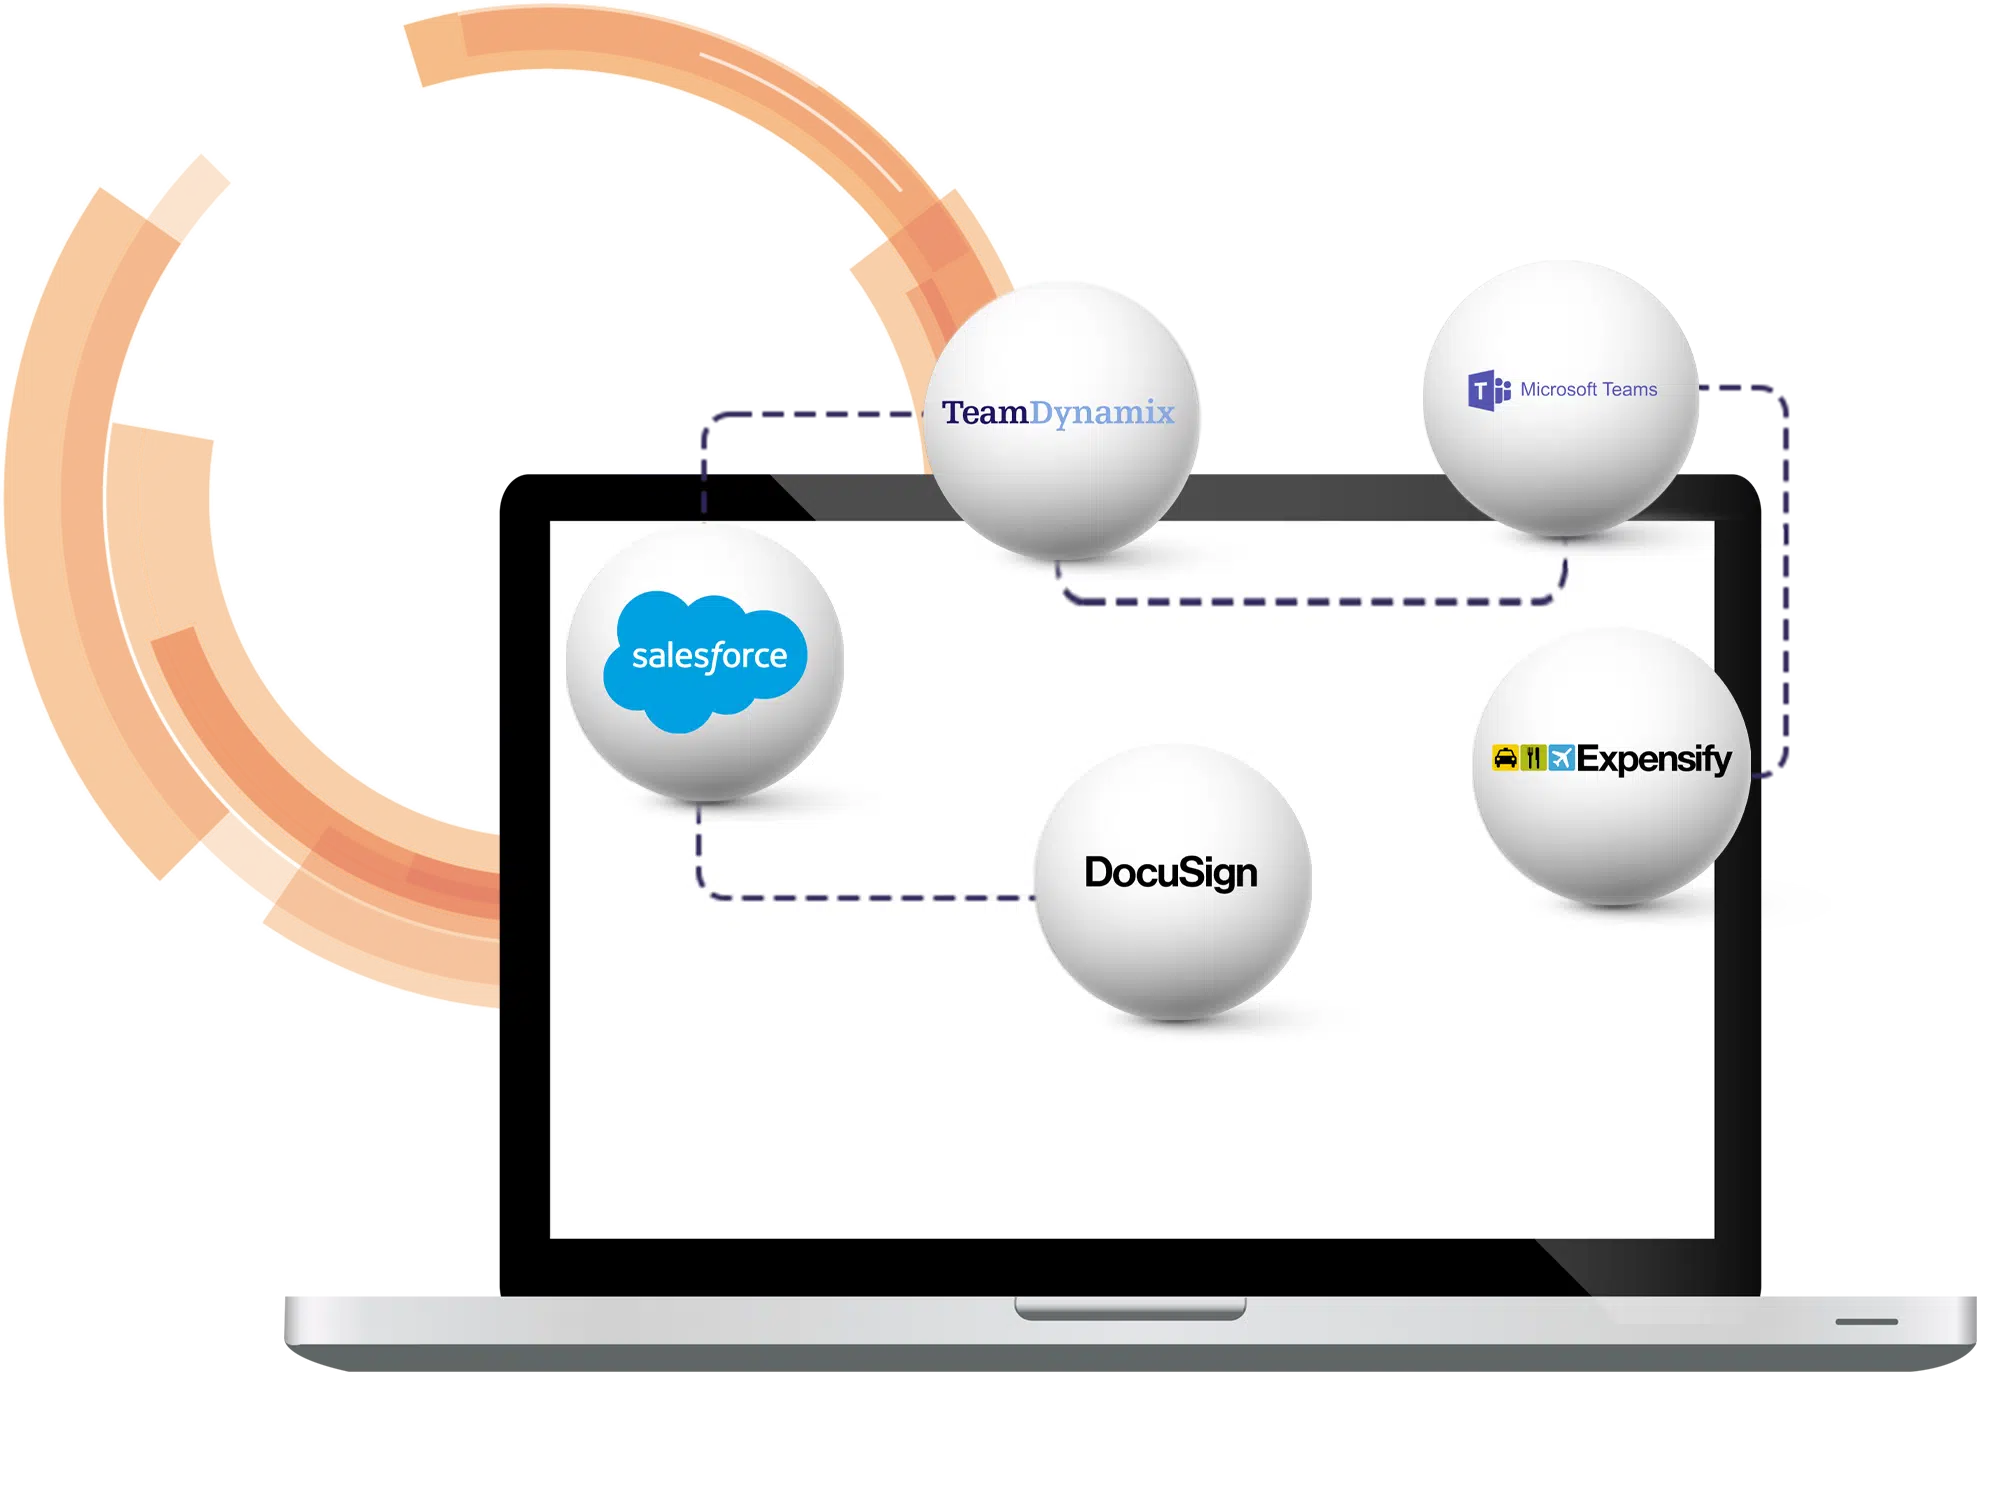 TeamDynamix iPaaS helps companies to integrate enterpise systems